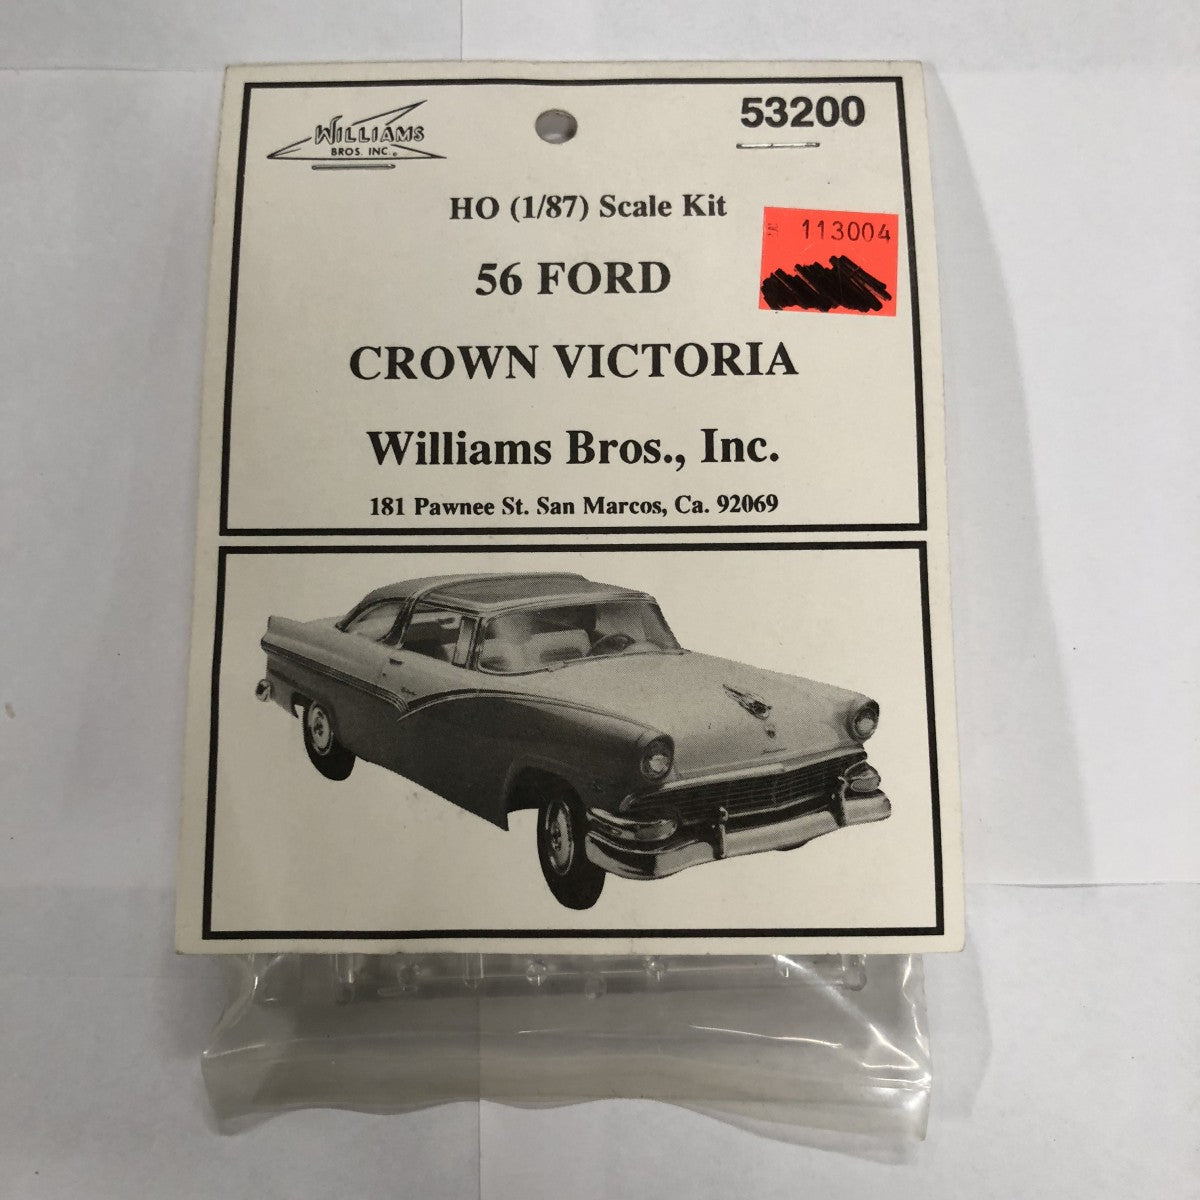 Williams Brothers 53200 HO 56 Ford Crown Victoria Plastic Kit